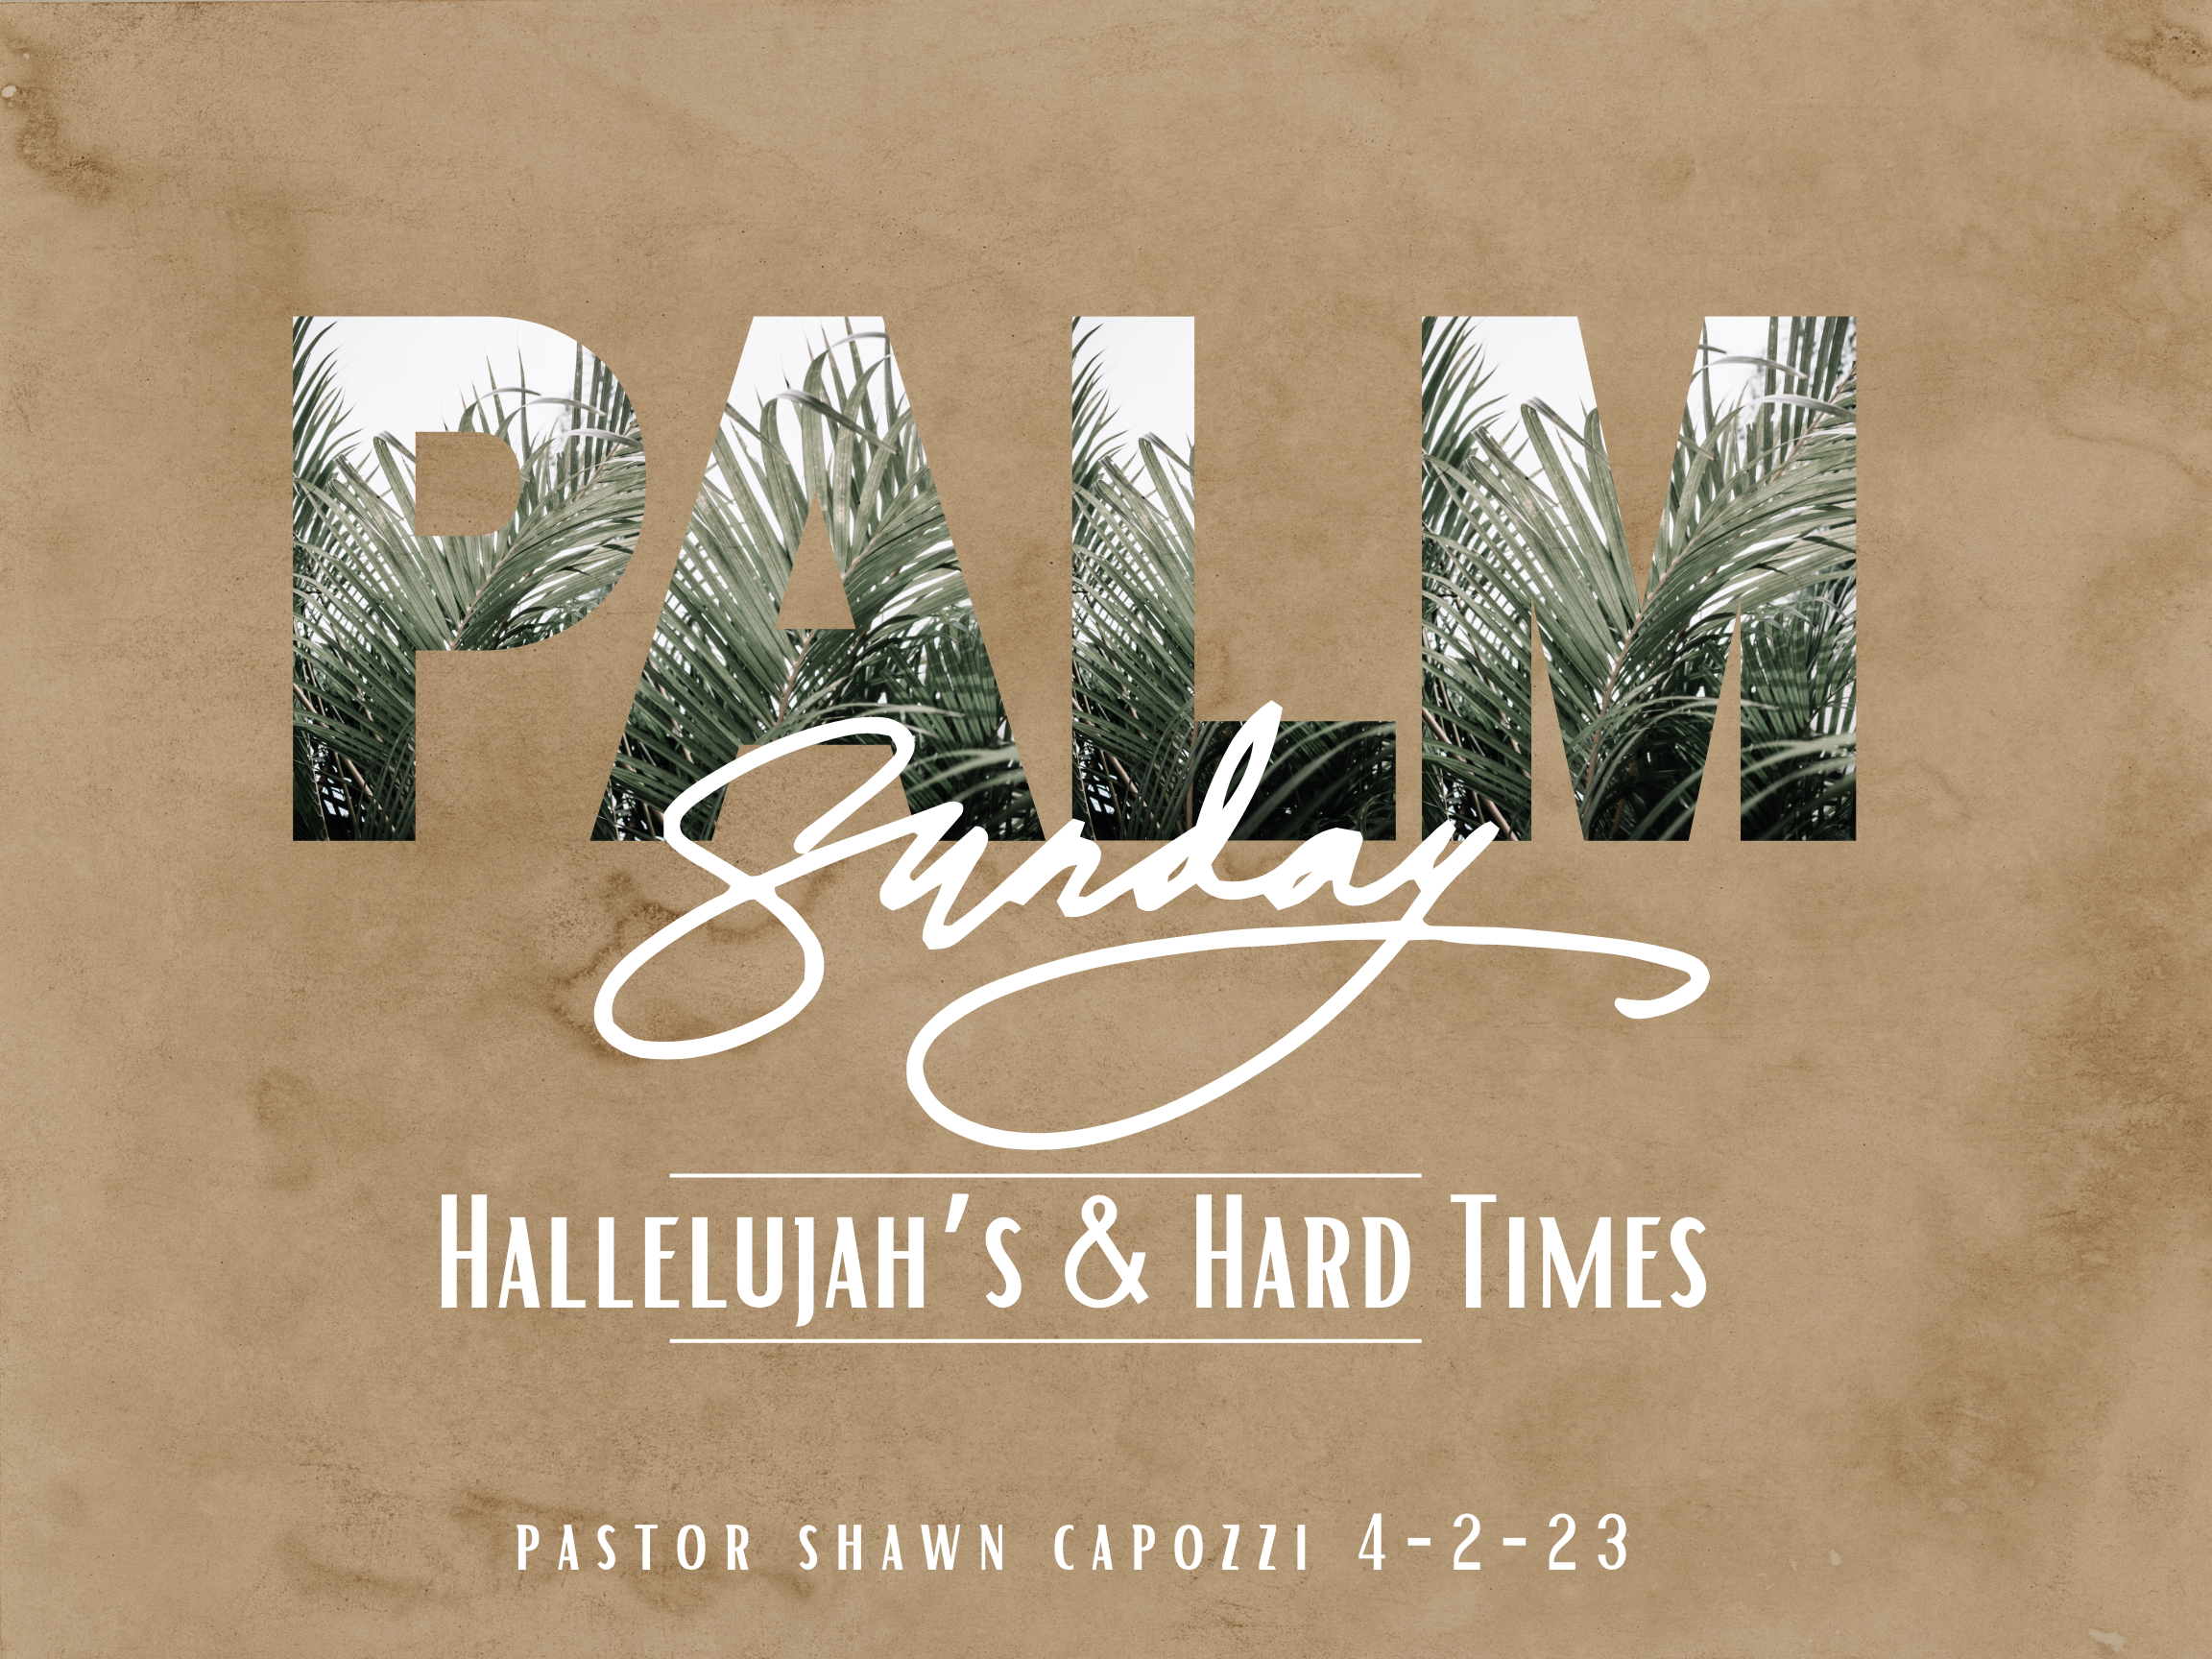 Hallelujah's and Hard Times